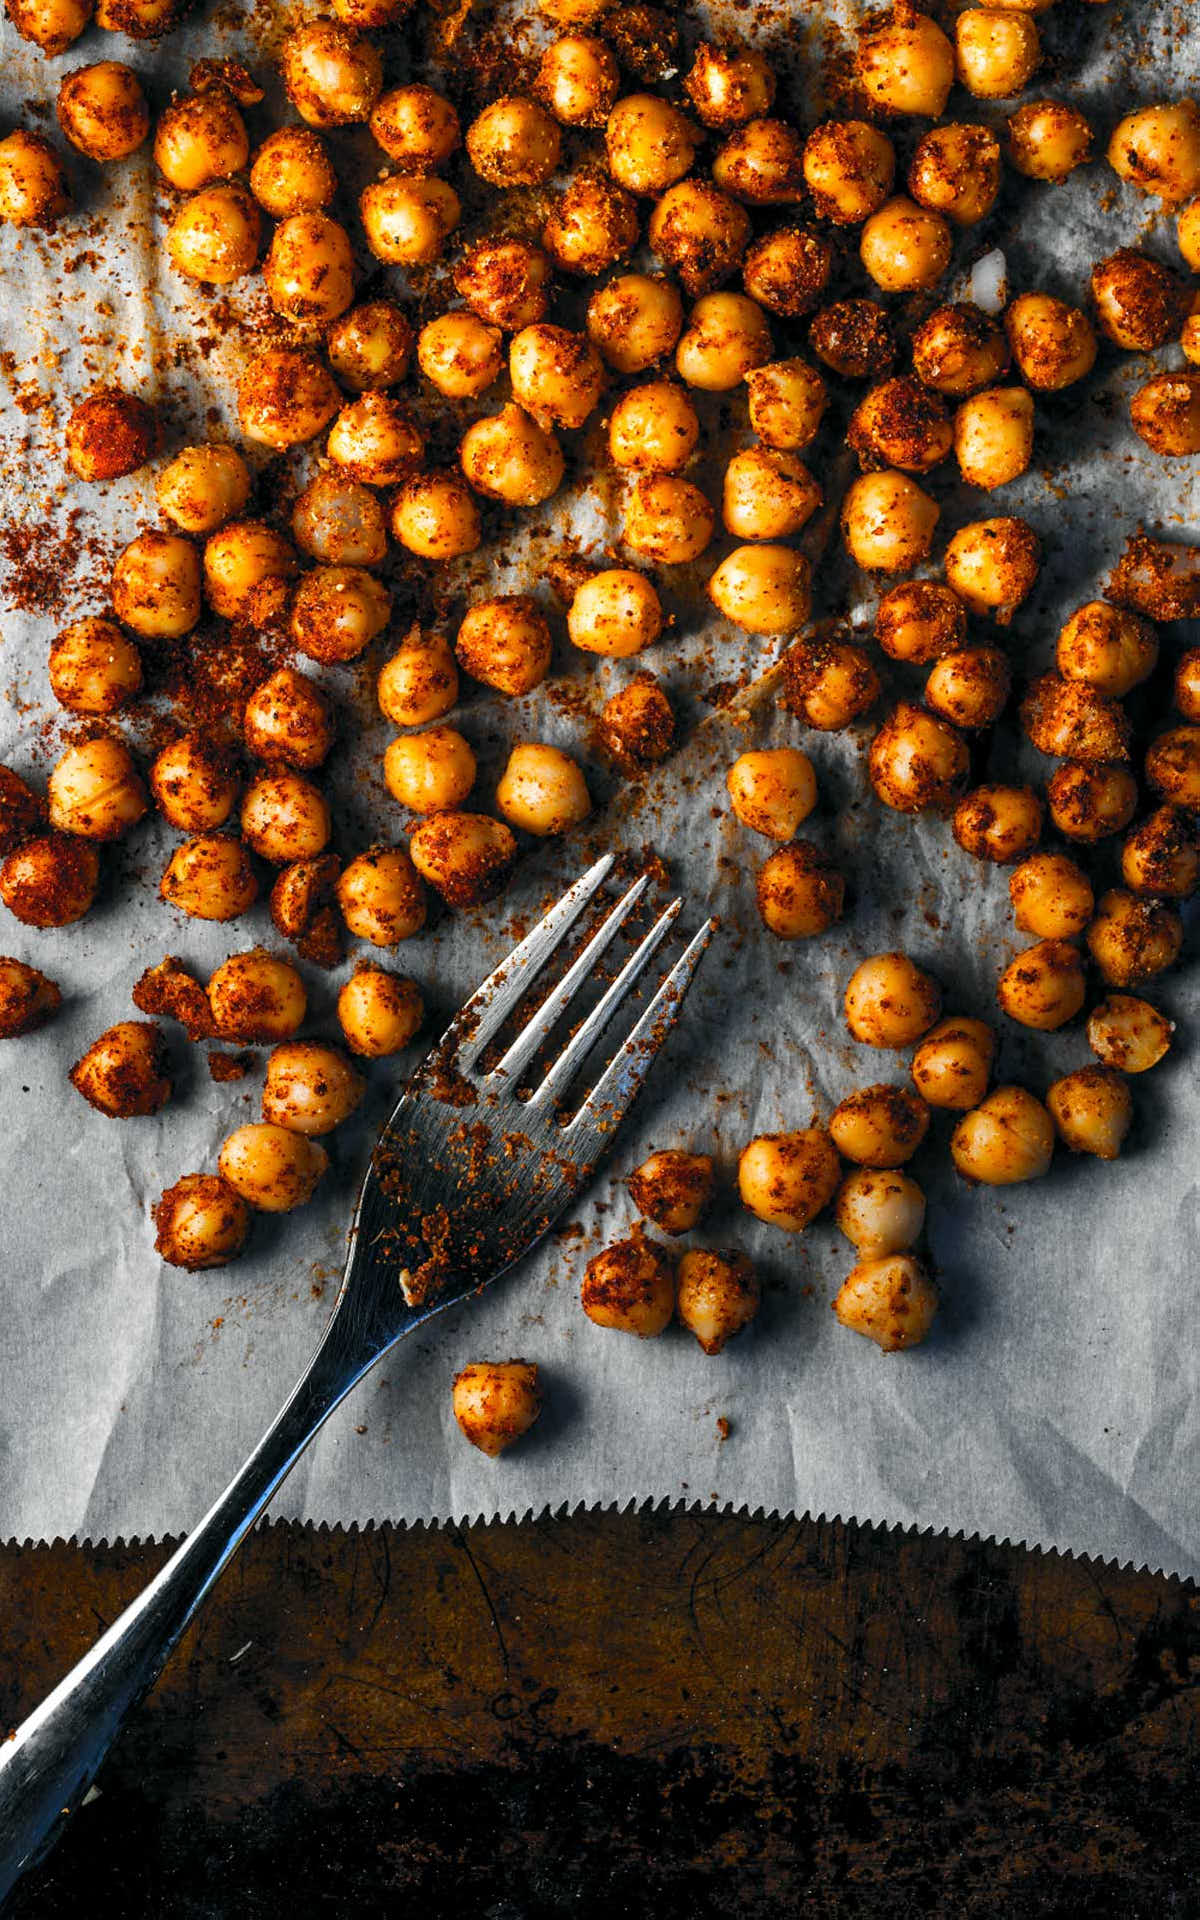 Crispy chickpeas fresh out of the oven